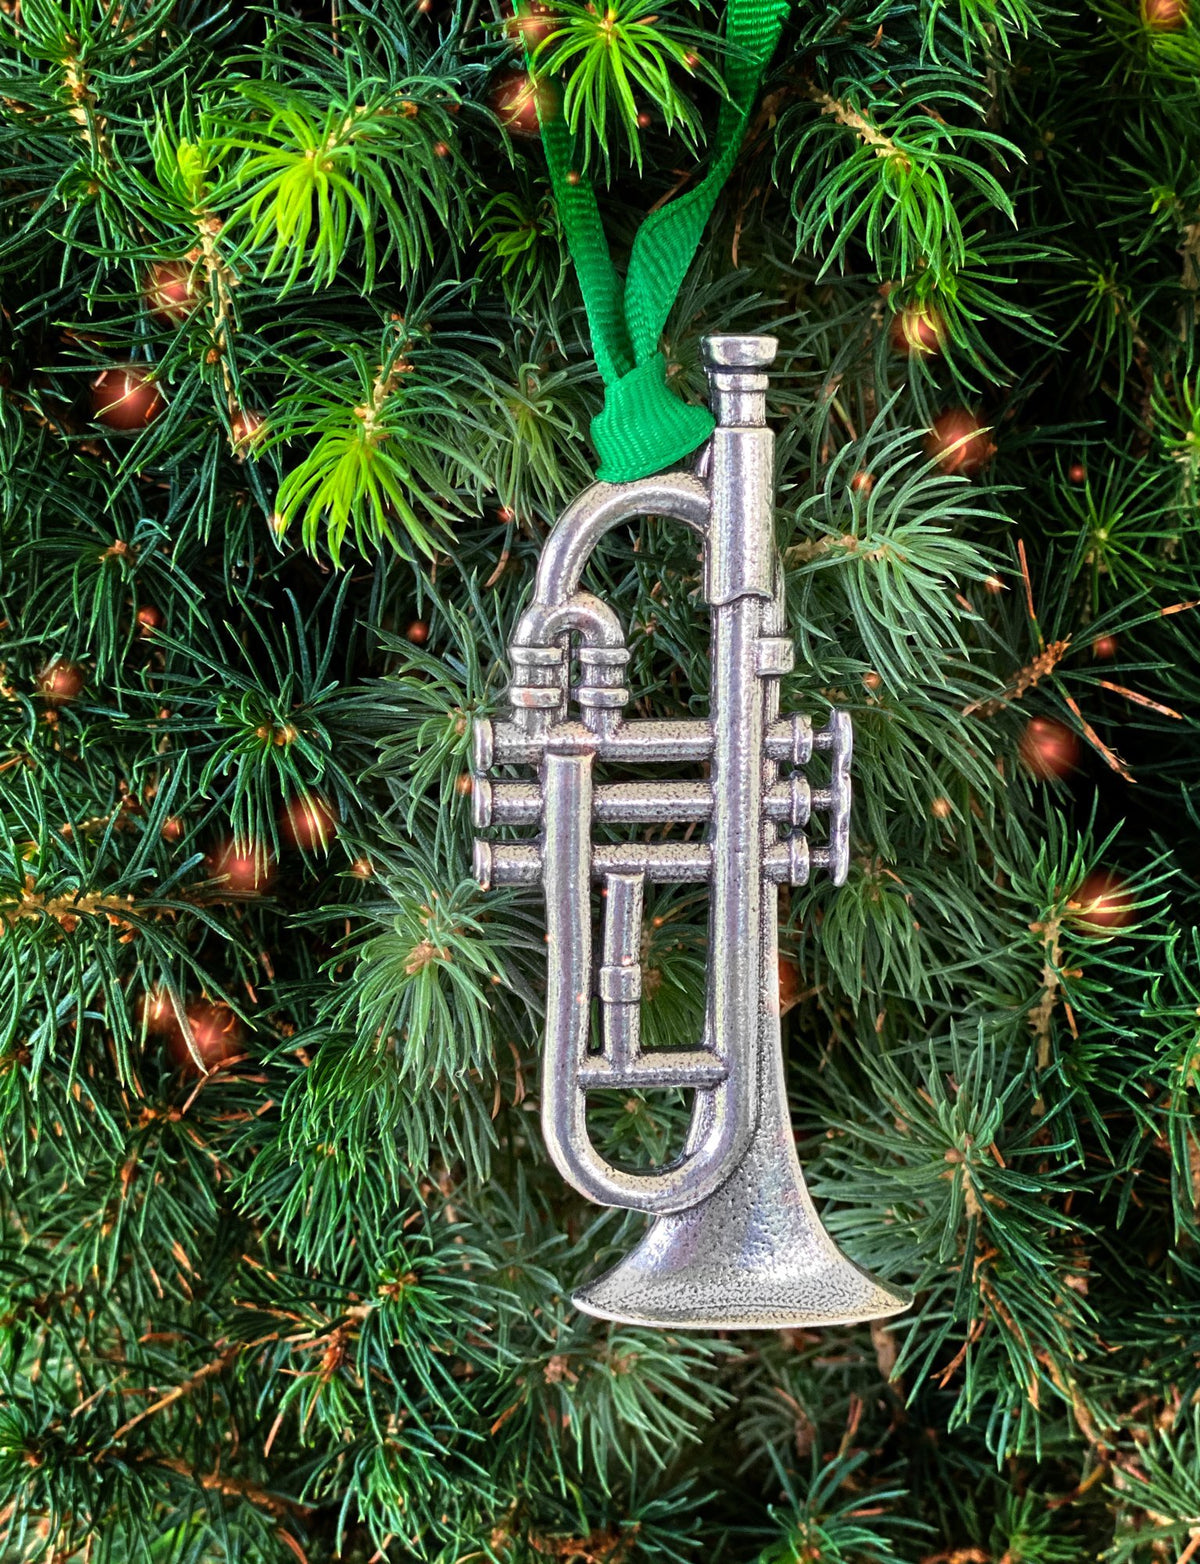 Oberon Design Collectable MetalHoliday Ornament, Christmas Trumpet